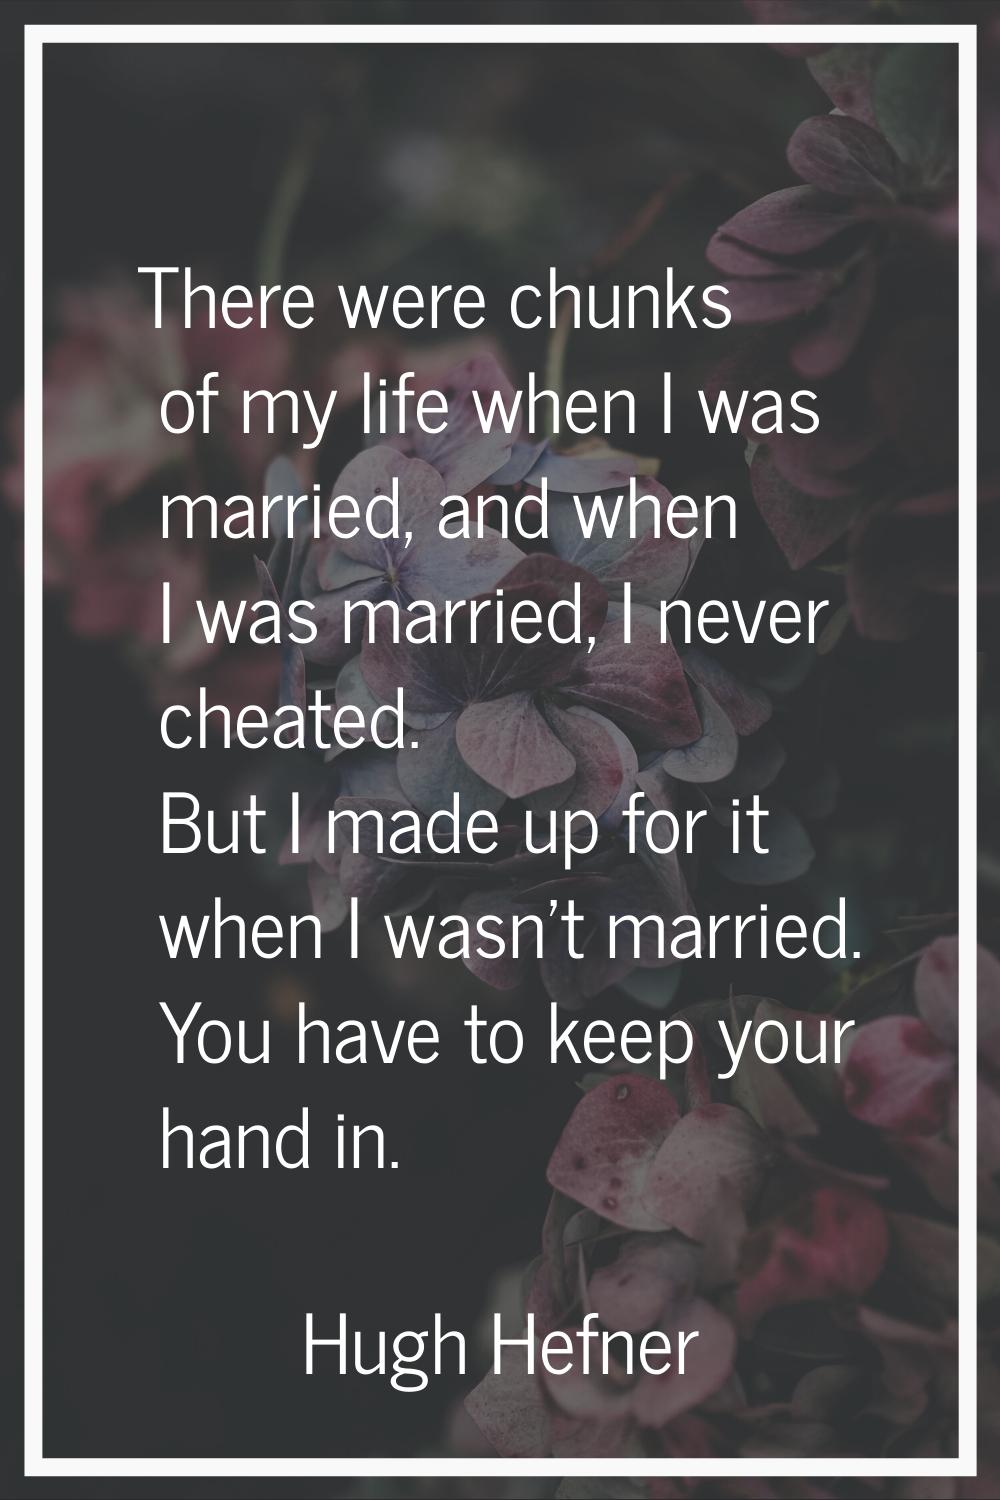 There were chunks of my life when I was married, and when I was married, I never cheated. But I mad